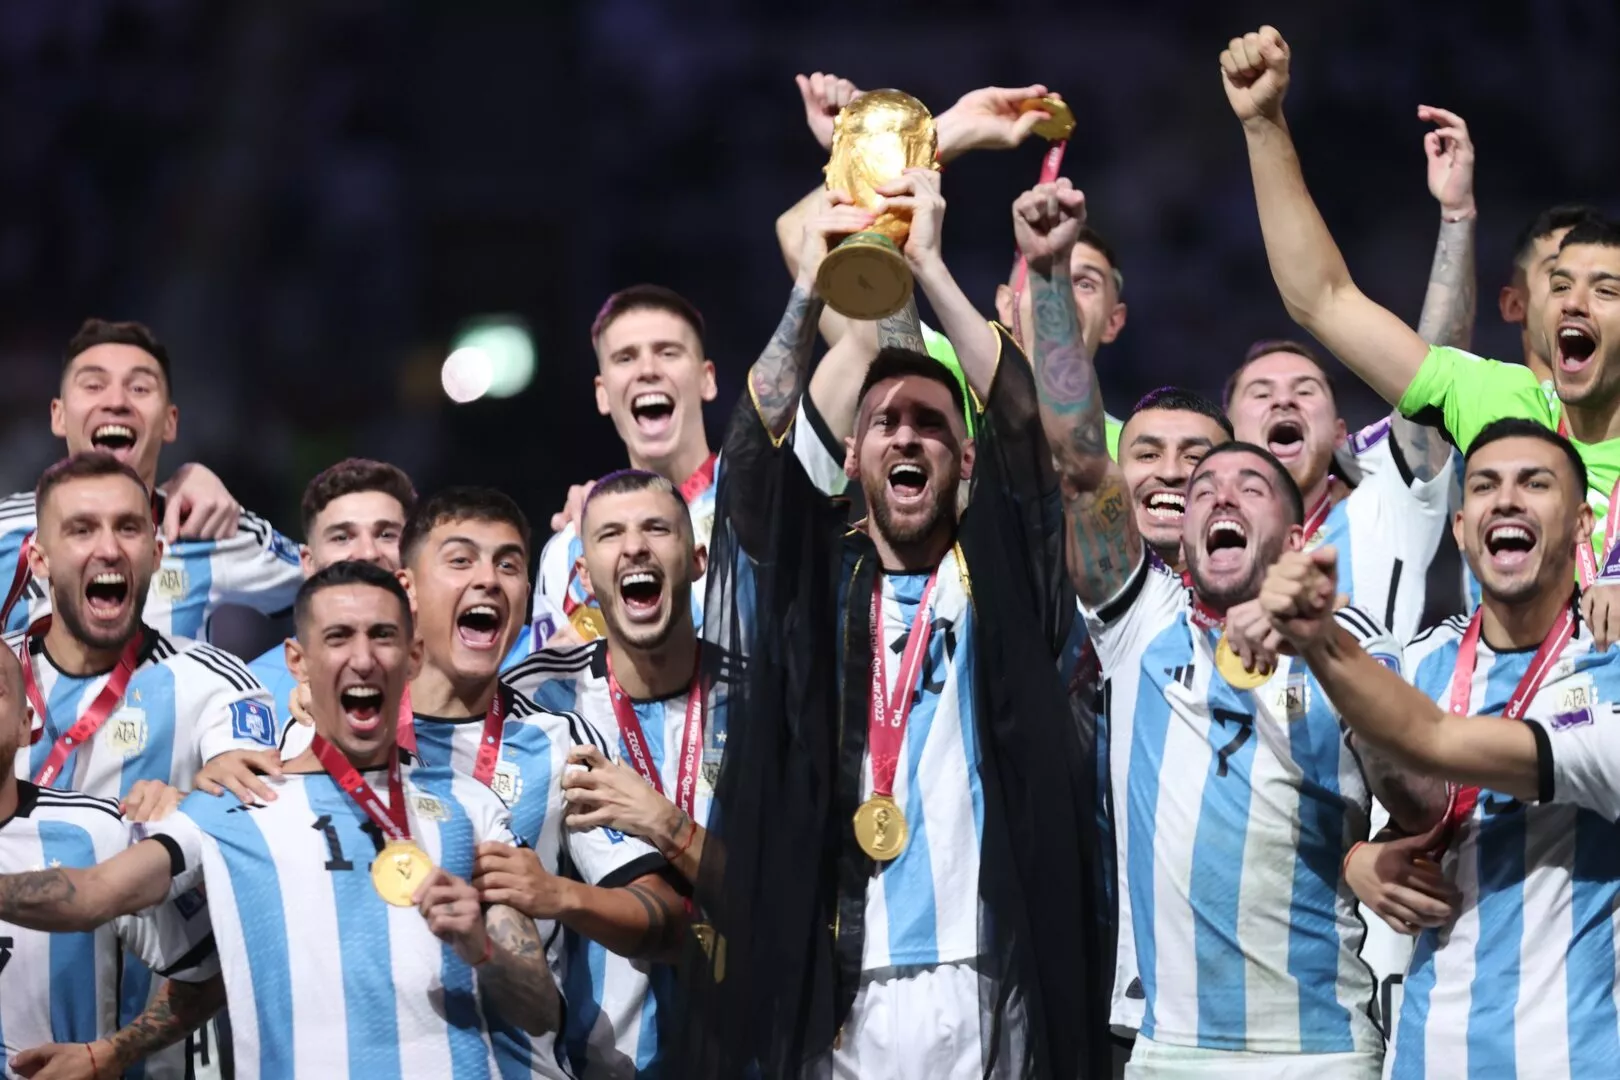 FIFA World Cup winners list: Know the champions from each edition